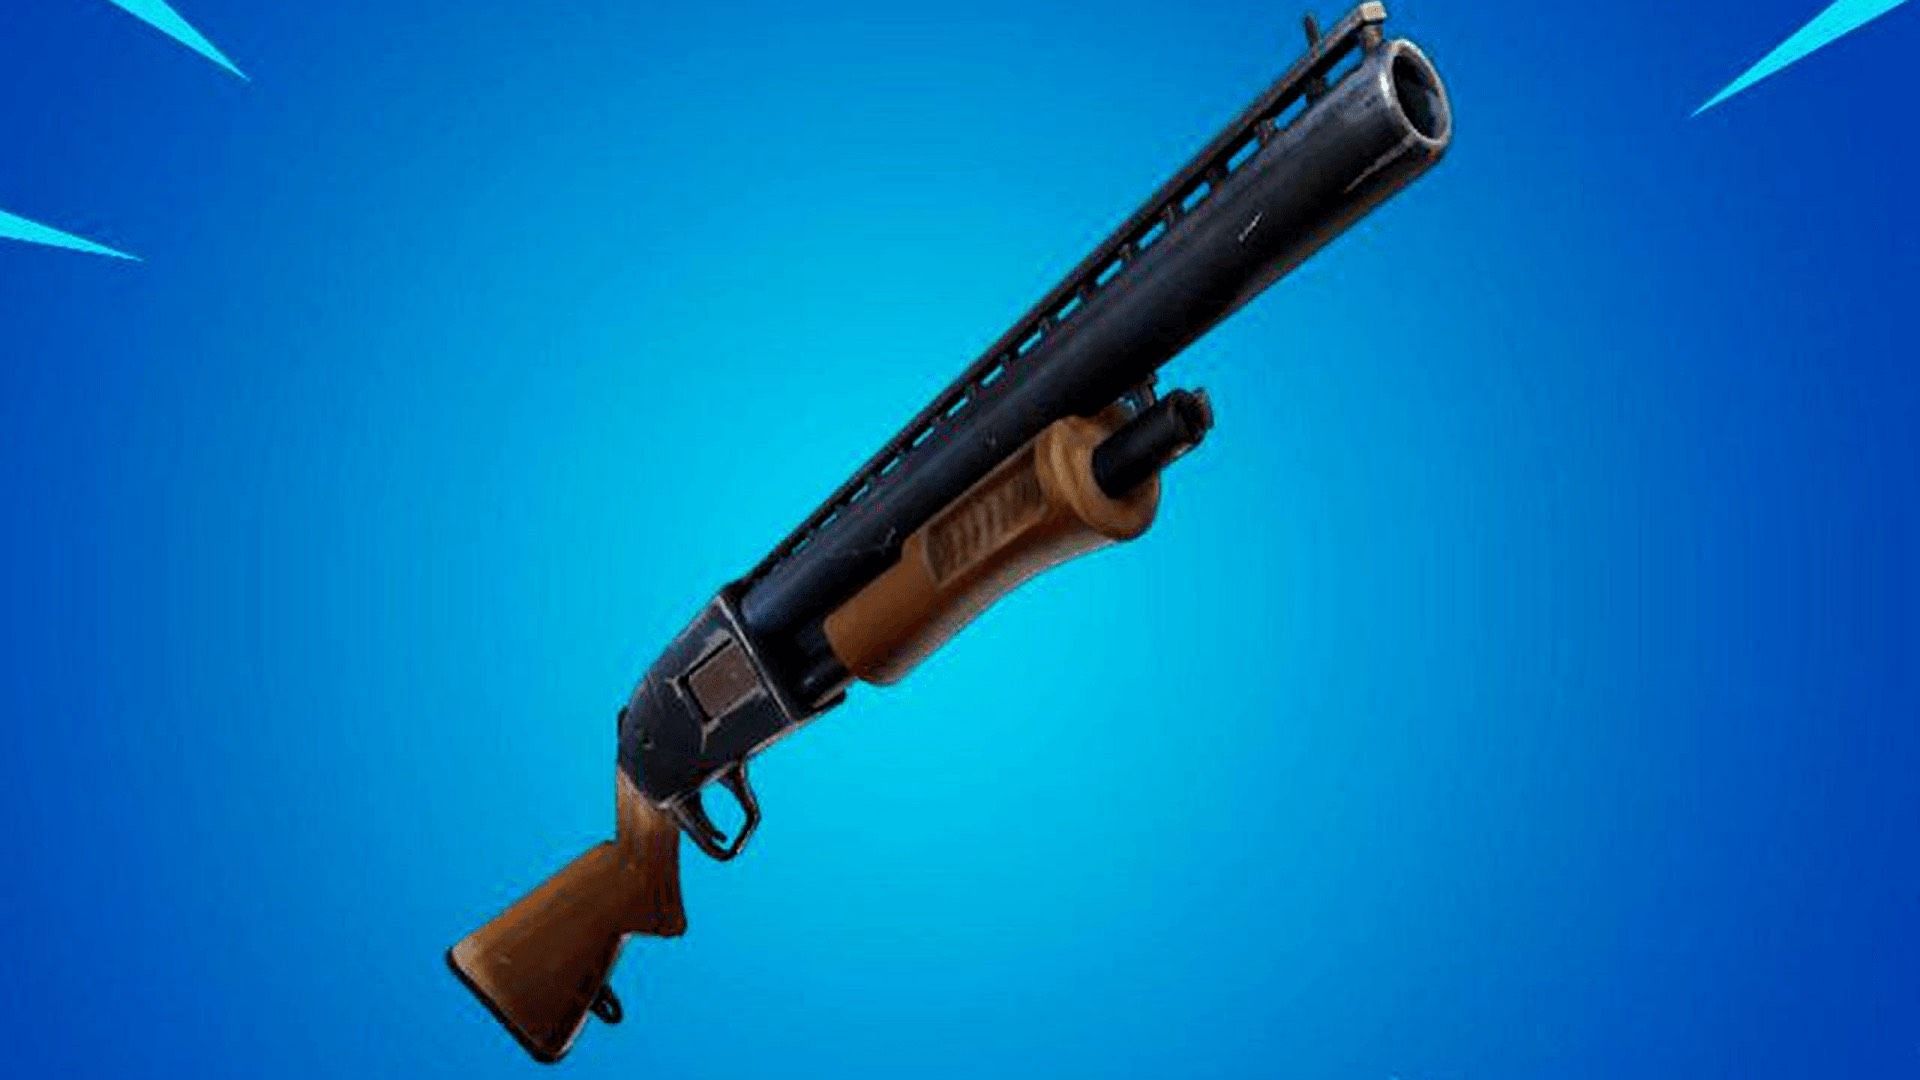 The Pump Shotgun is still available in Fortnite (Image via Epic Games)